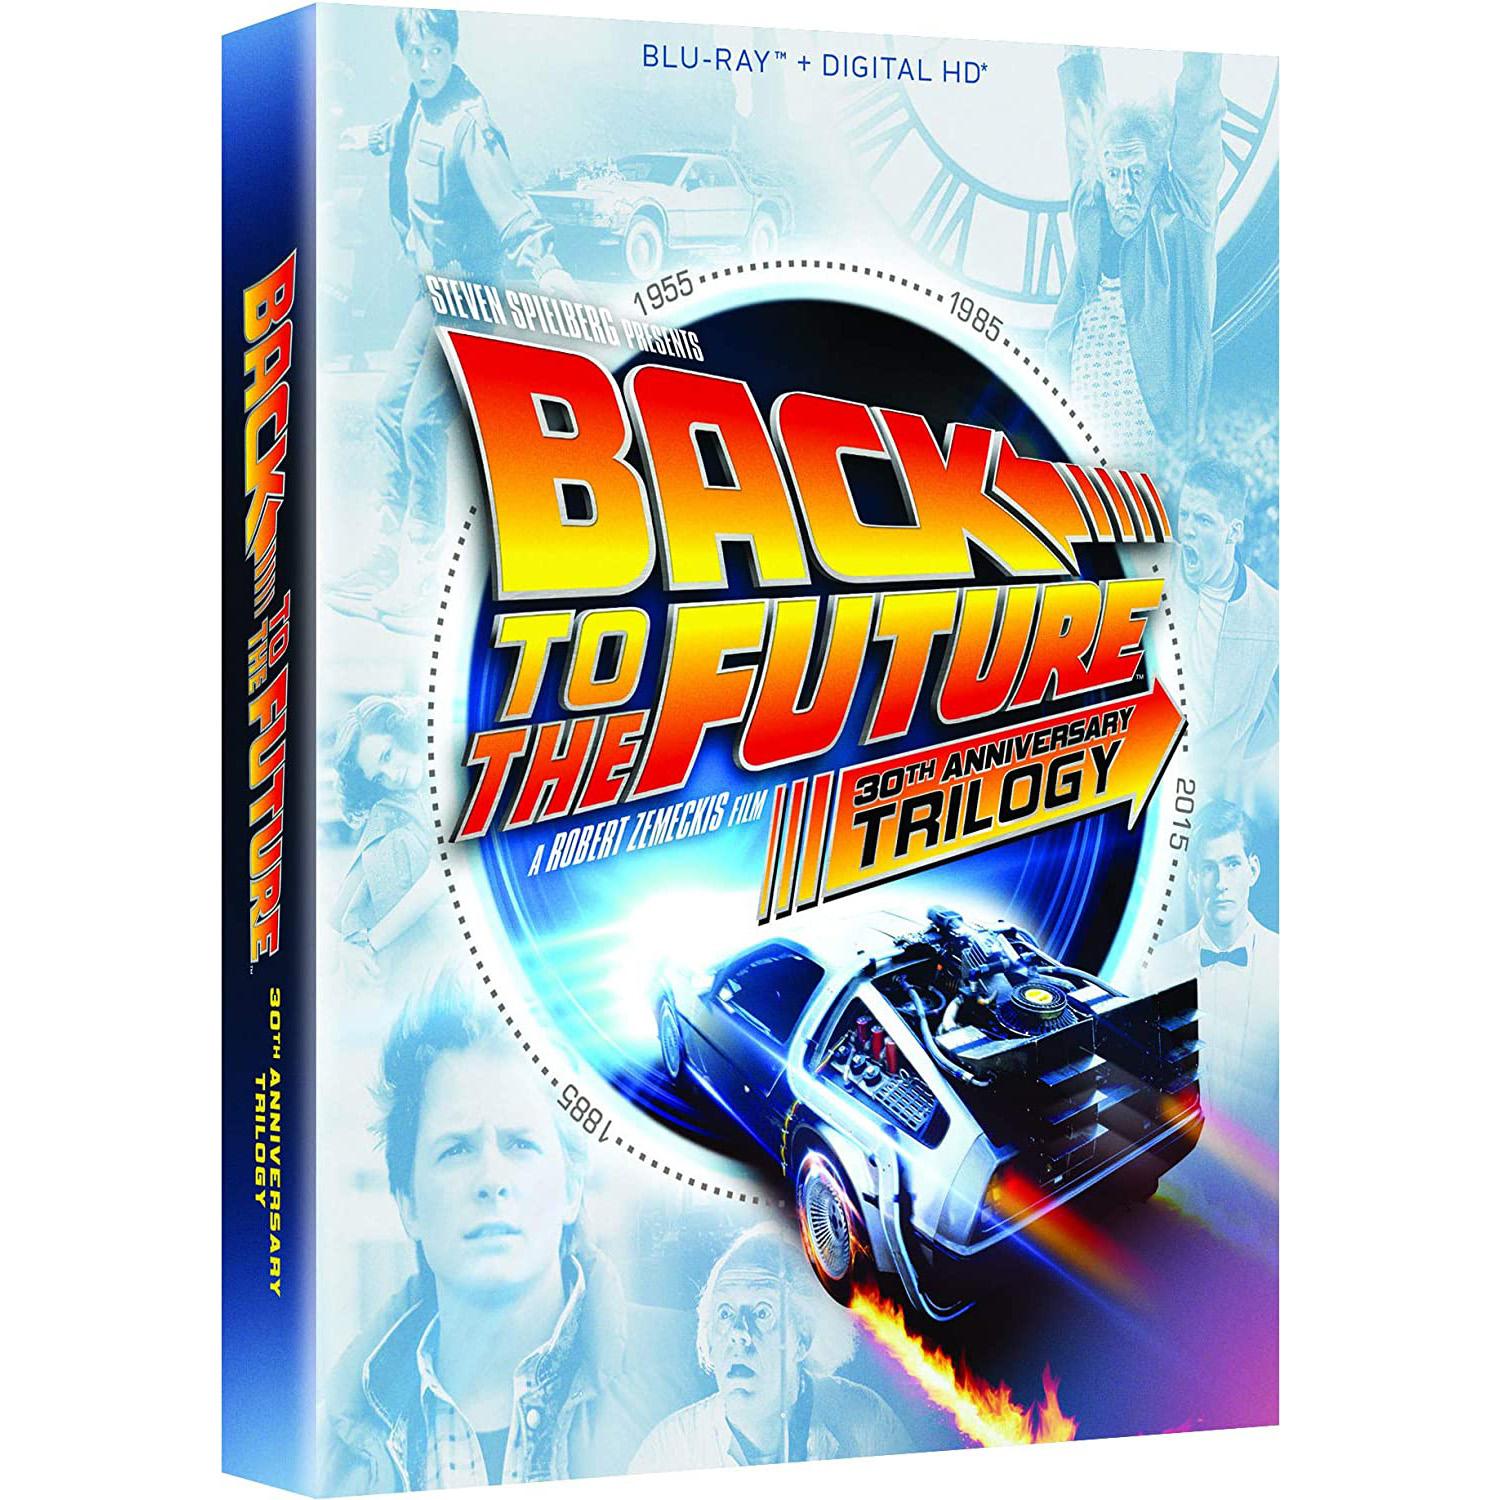 Back to the Future Trilogy Blu-Ray for $14.99